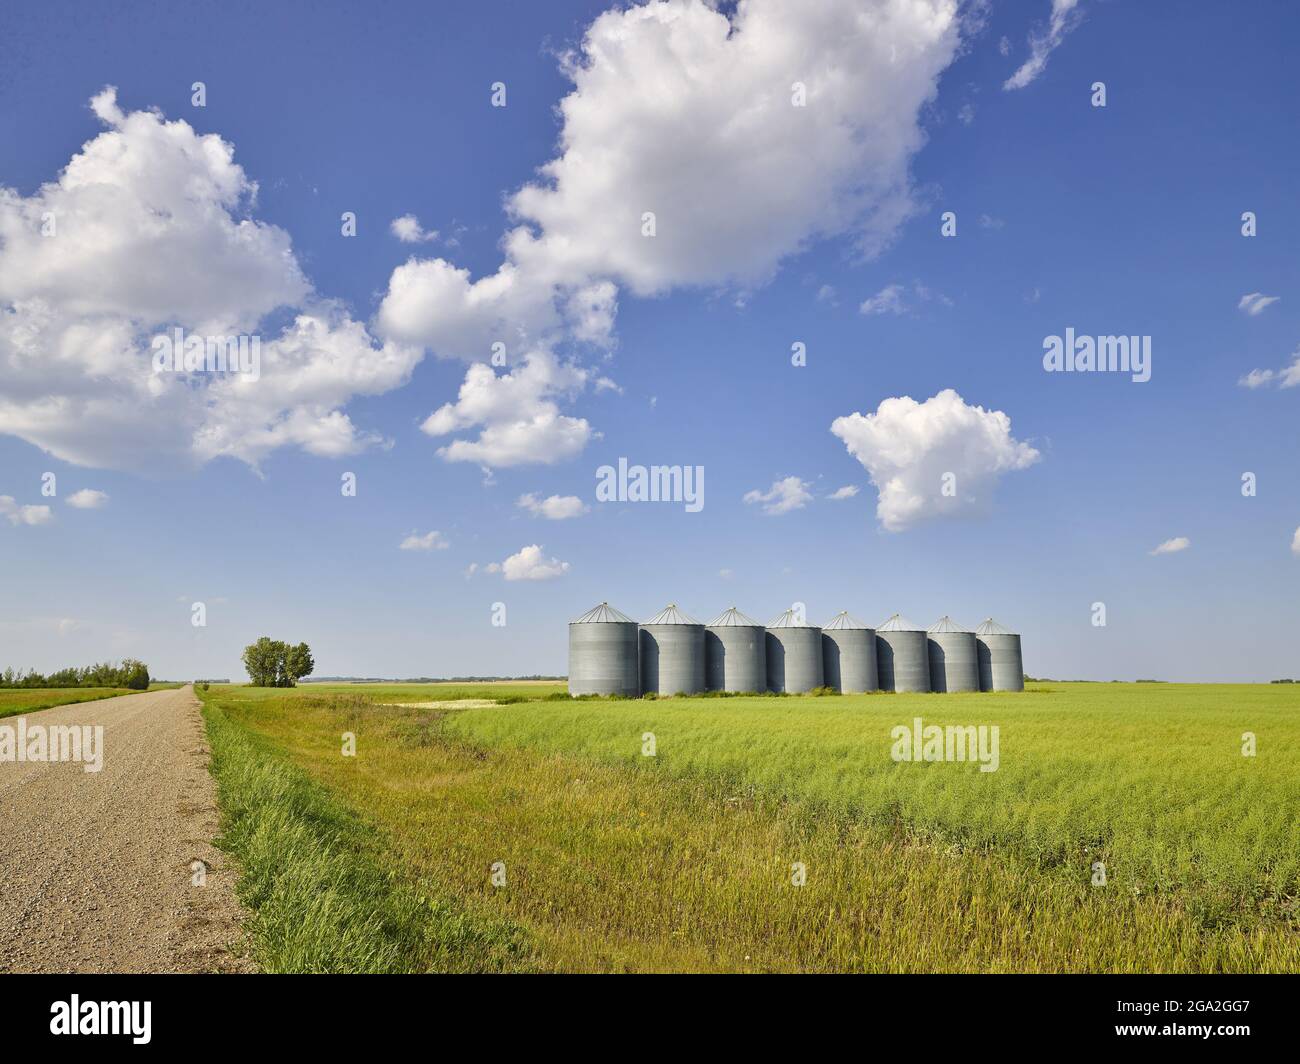 Zimmerman Road Country Farm with a row of grain storage bins in the middle of a green, grassy field of hay next to a dirt road Stock Photo